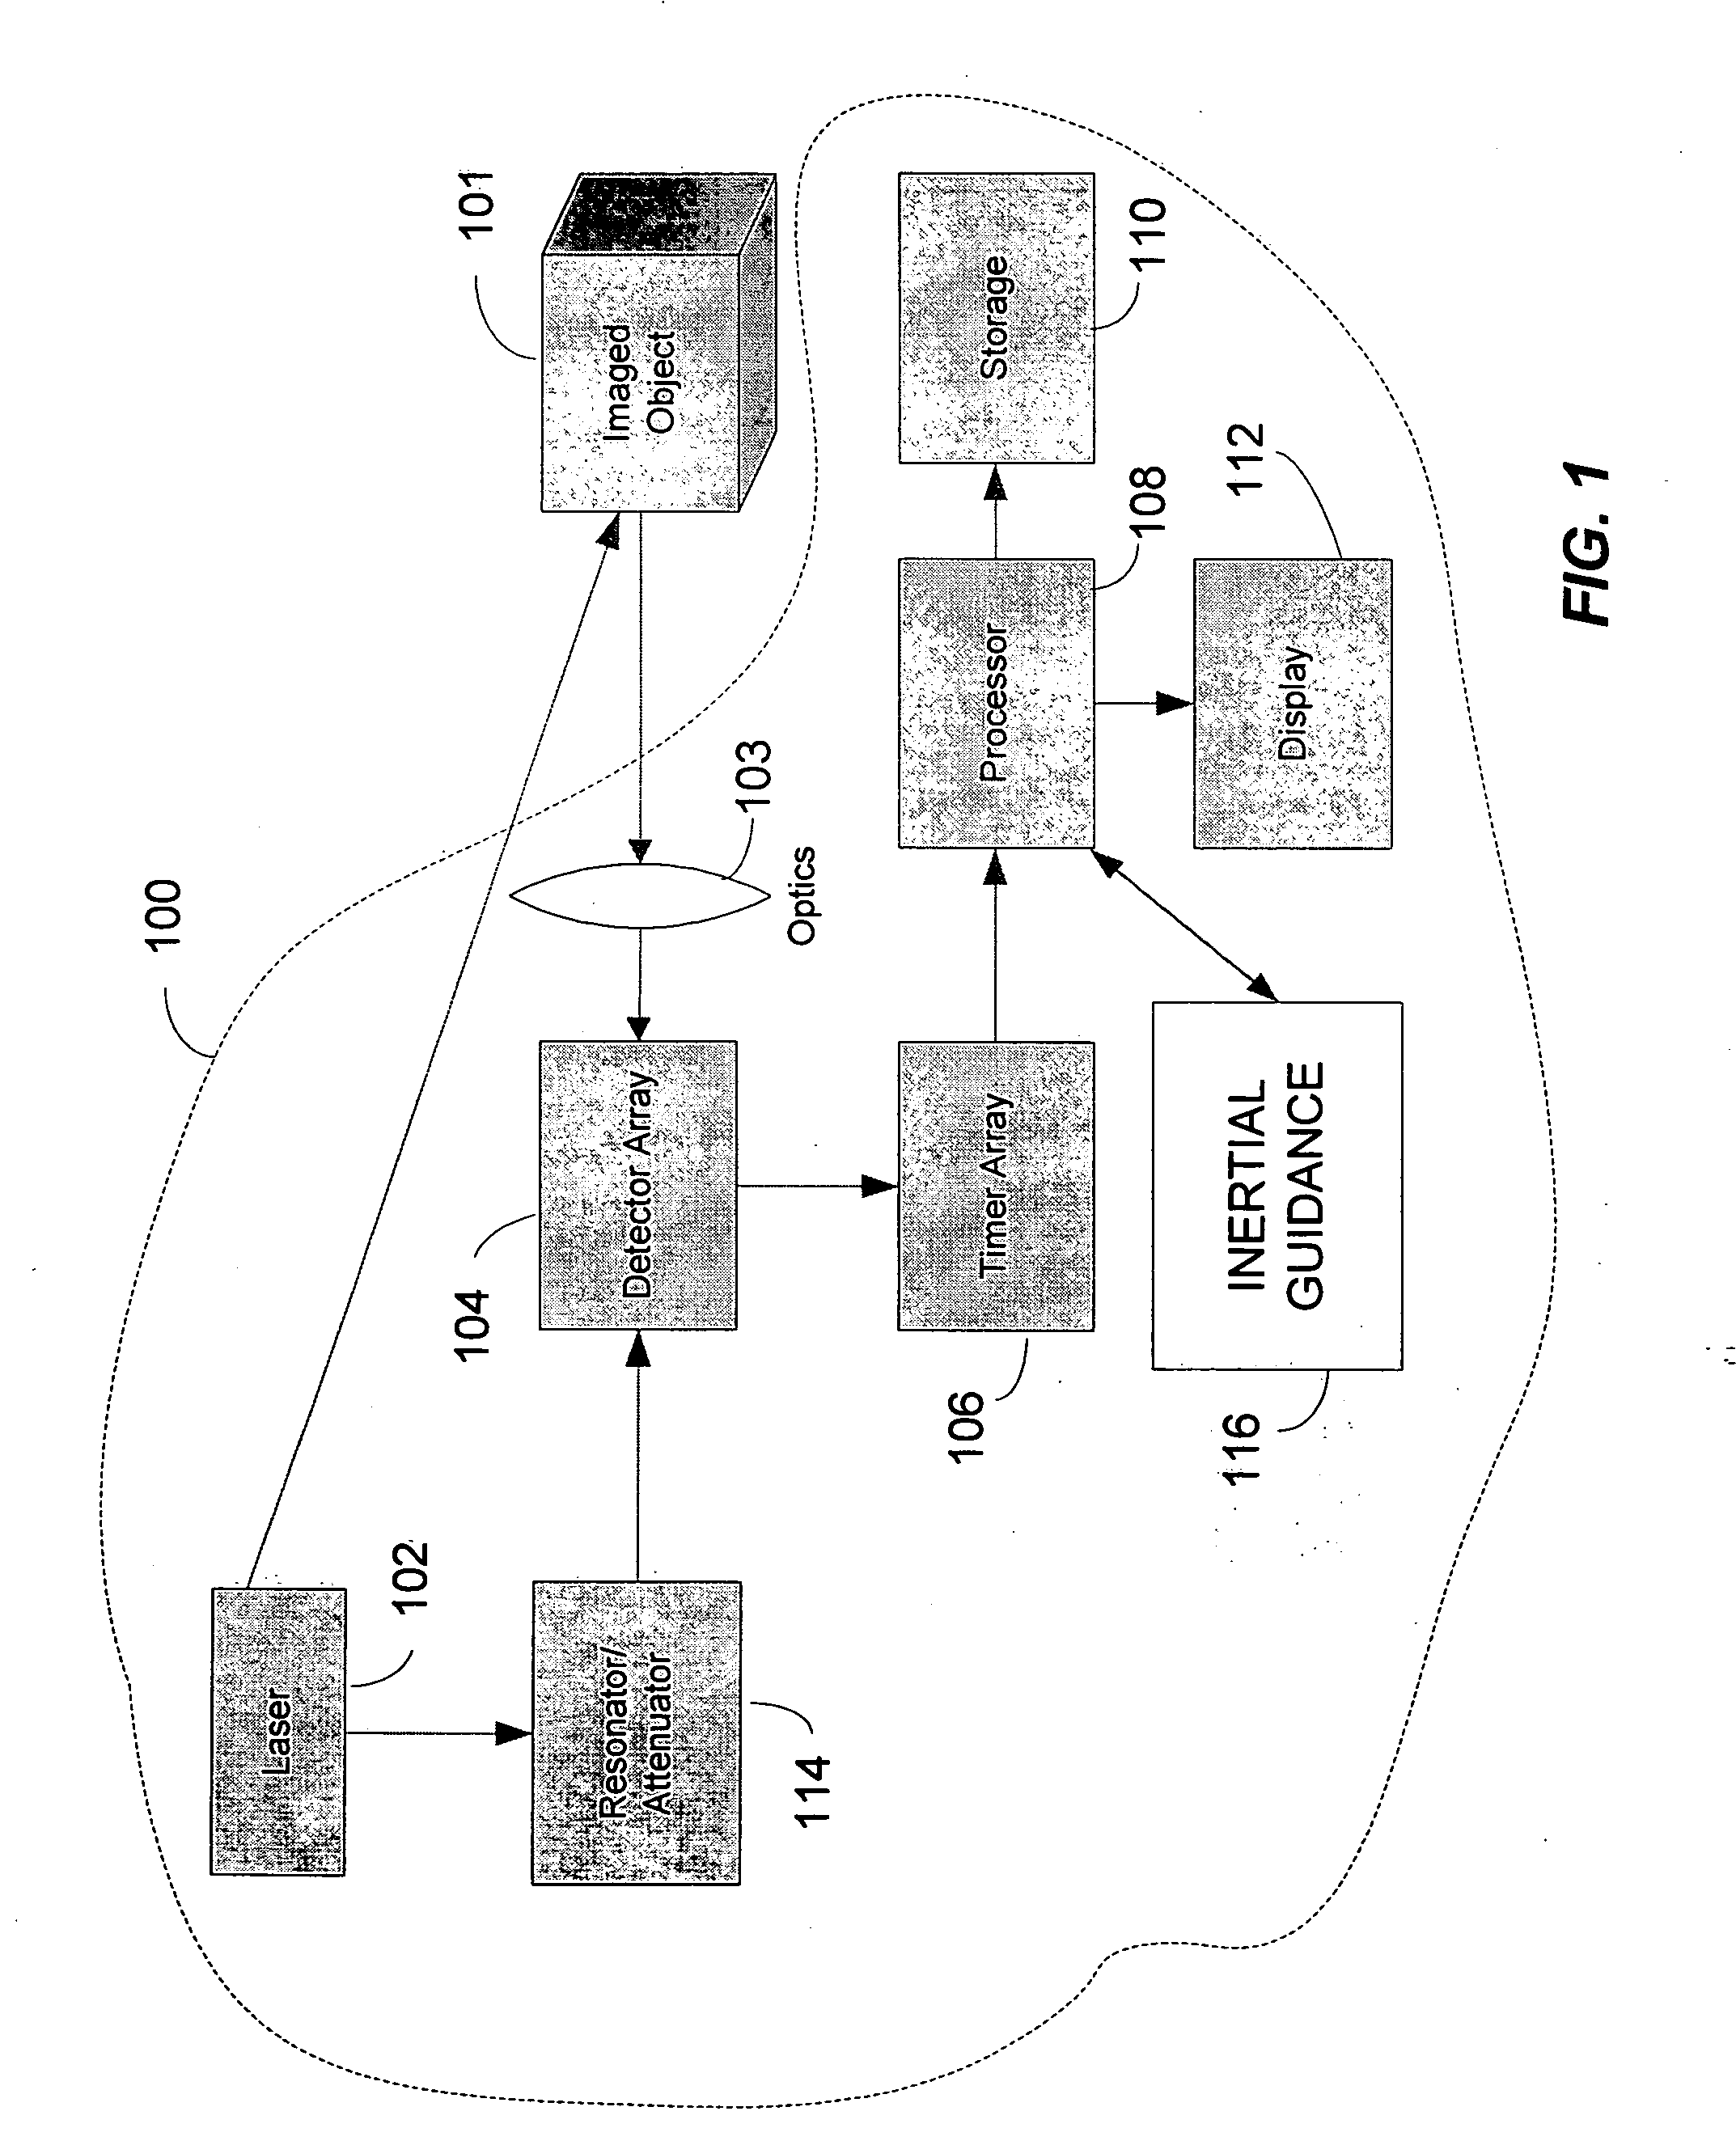 Method and apparatus for high resolution 3D imaging